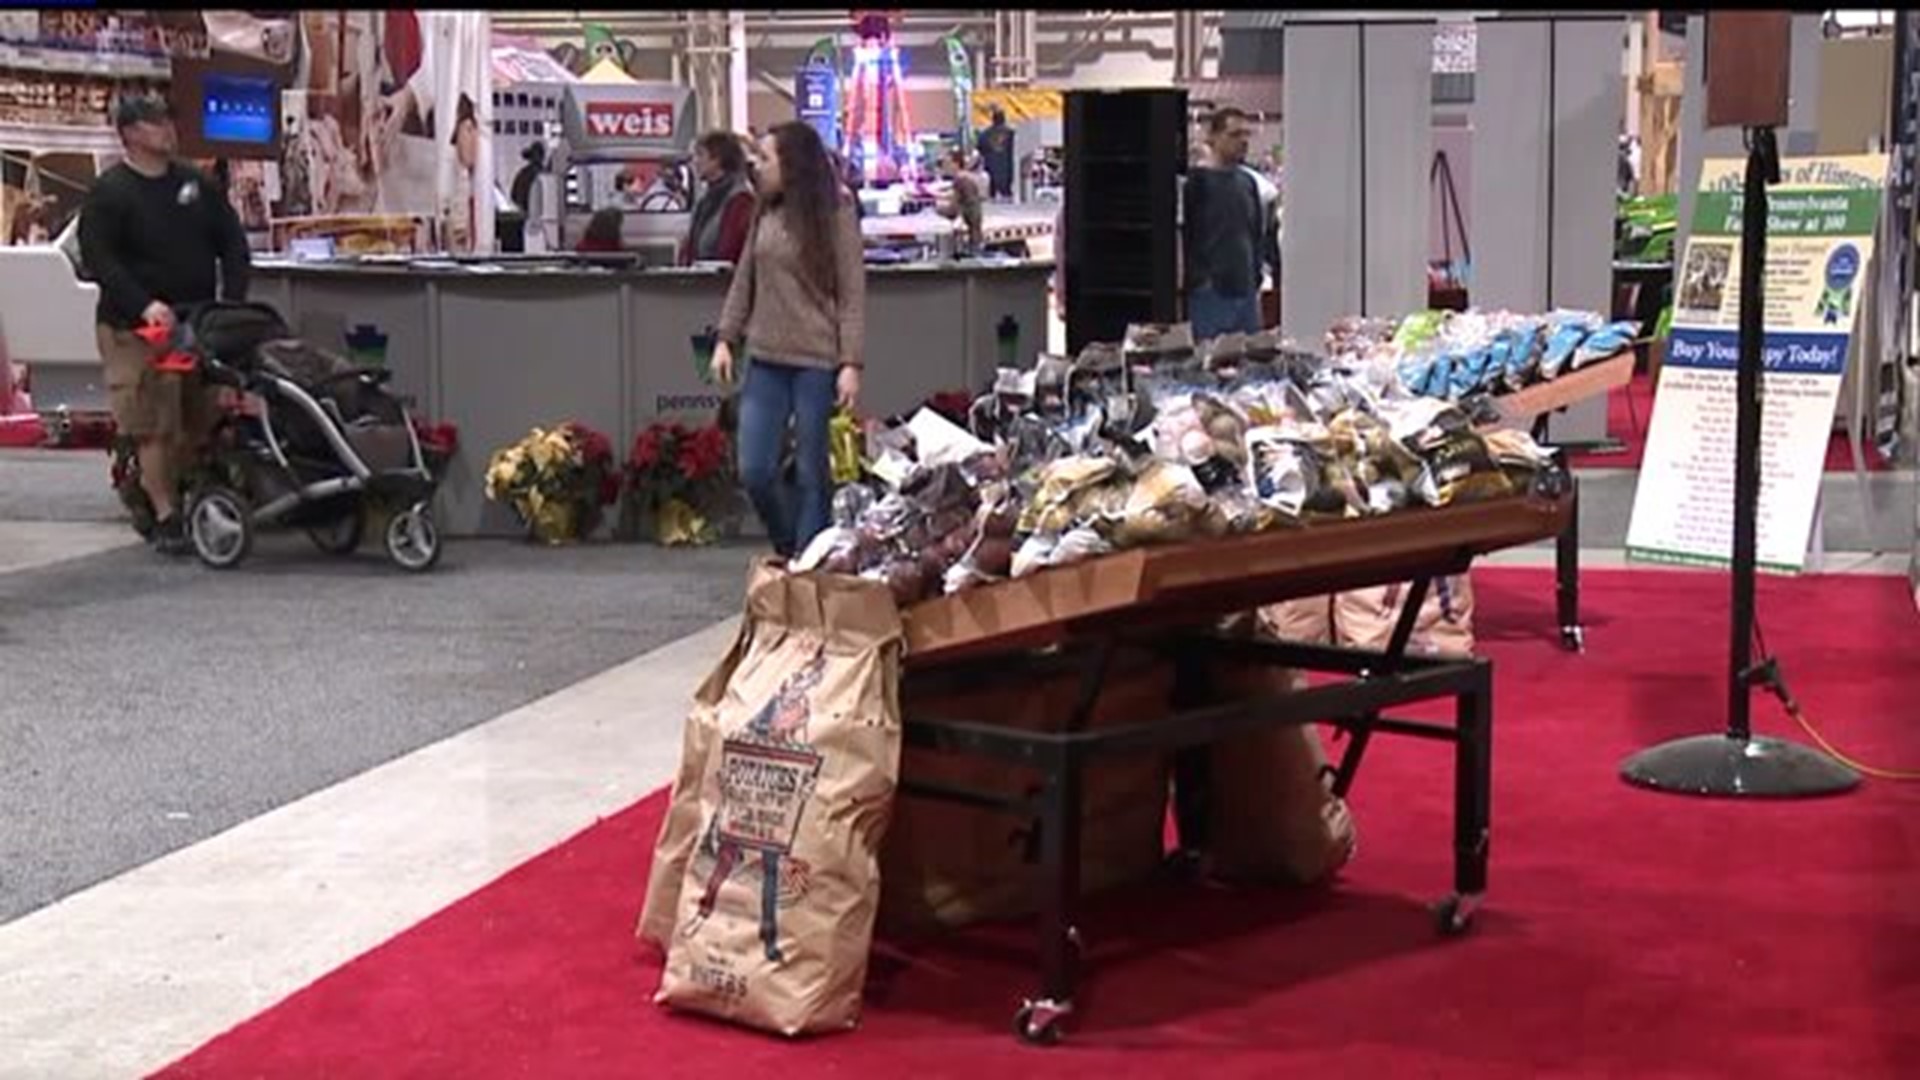 New farm show exhibit from Weis Markets